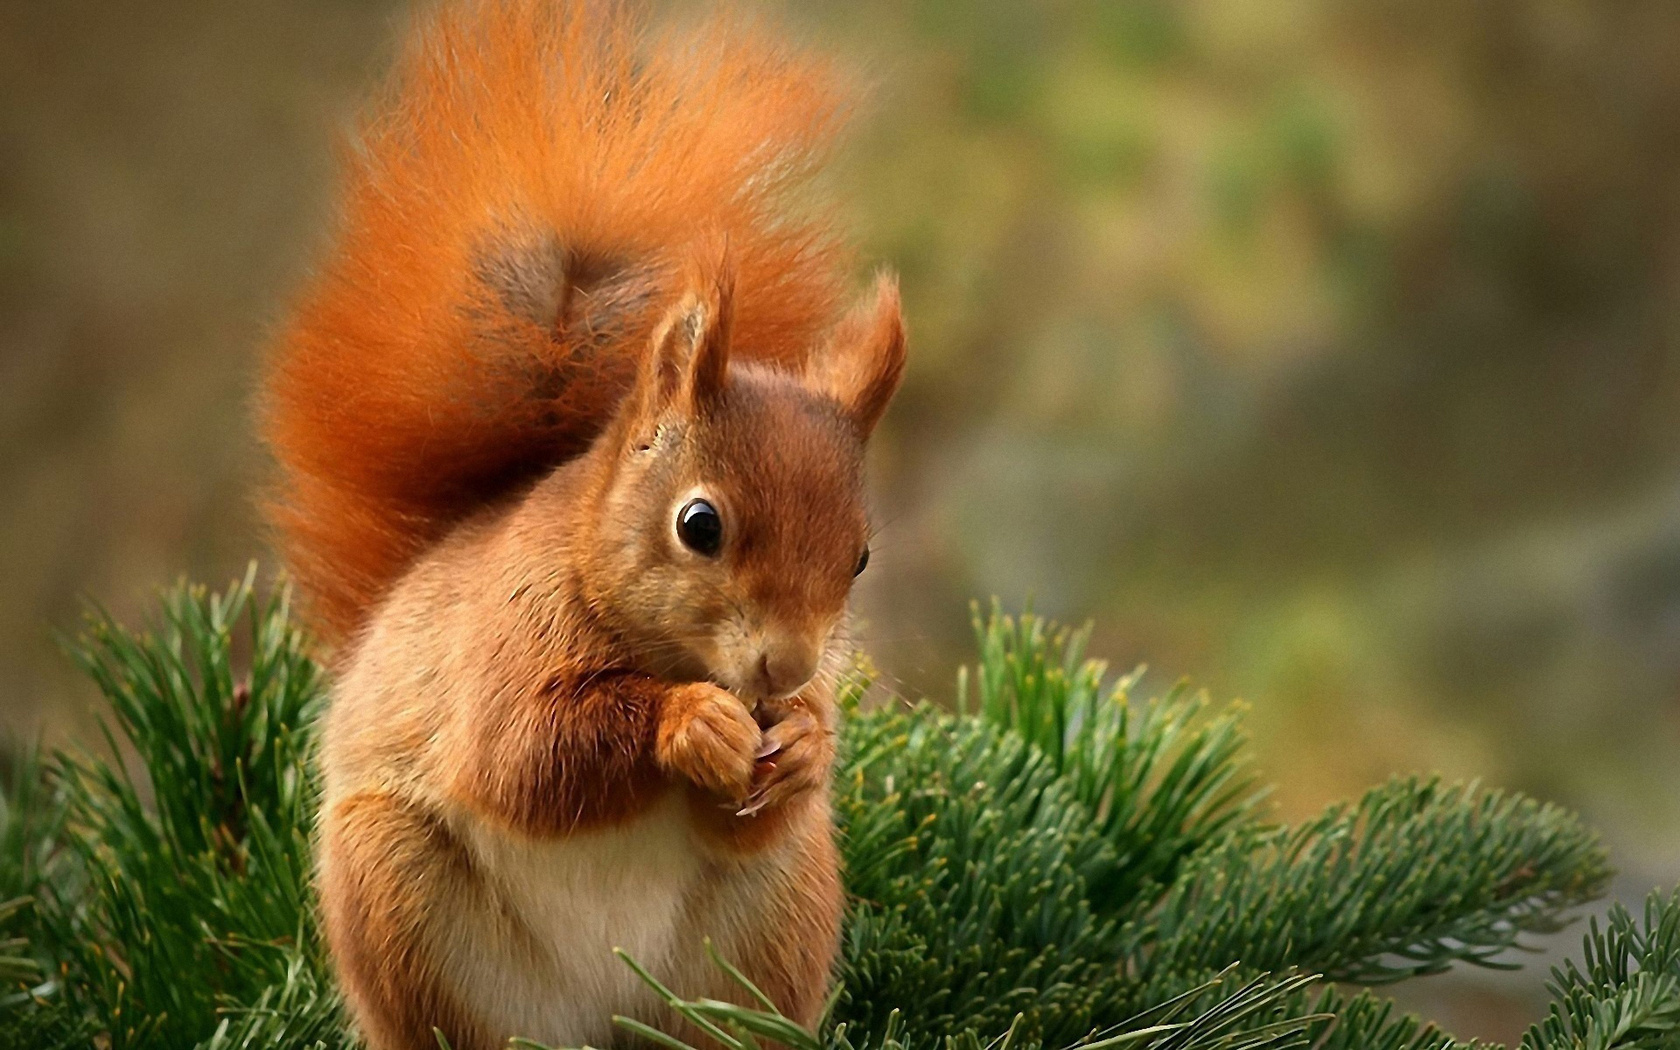  on July 9 2015 By Stephen Comments Off on Squirrel HD Wallpaper